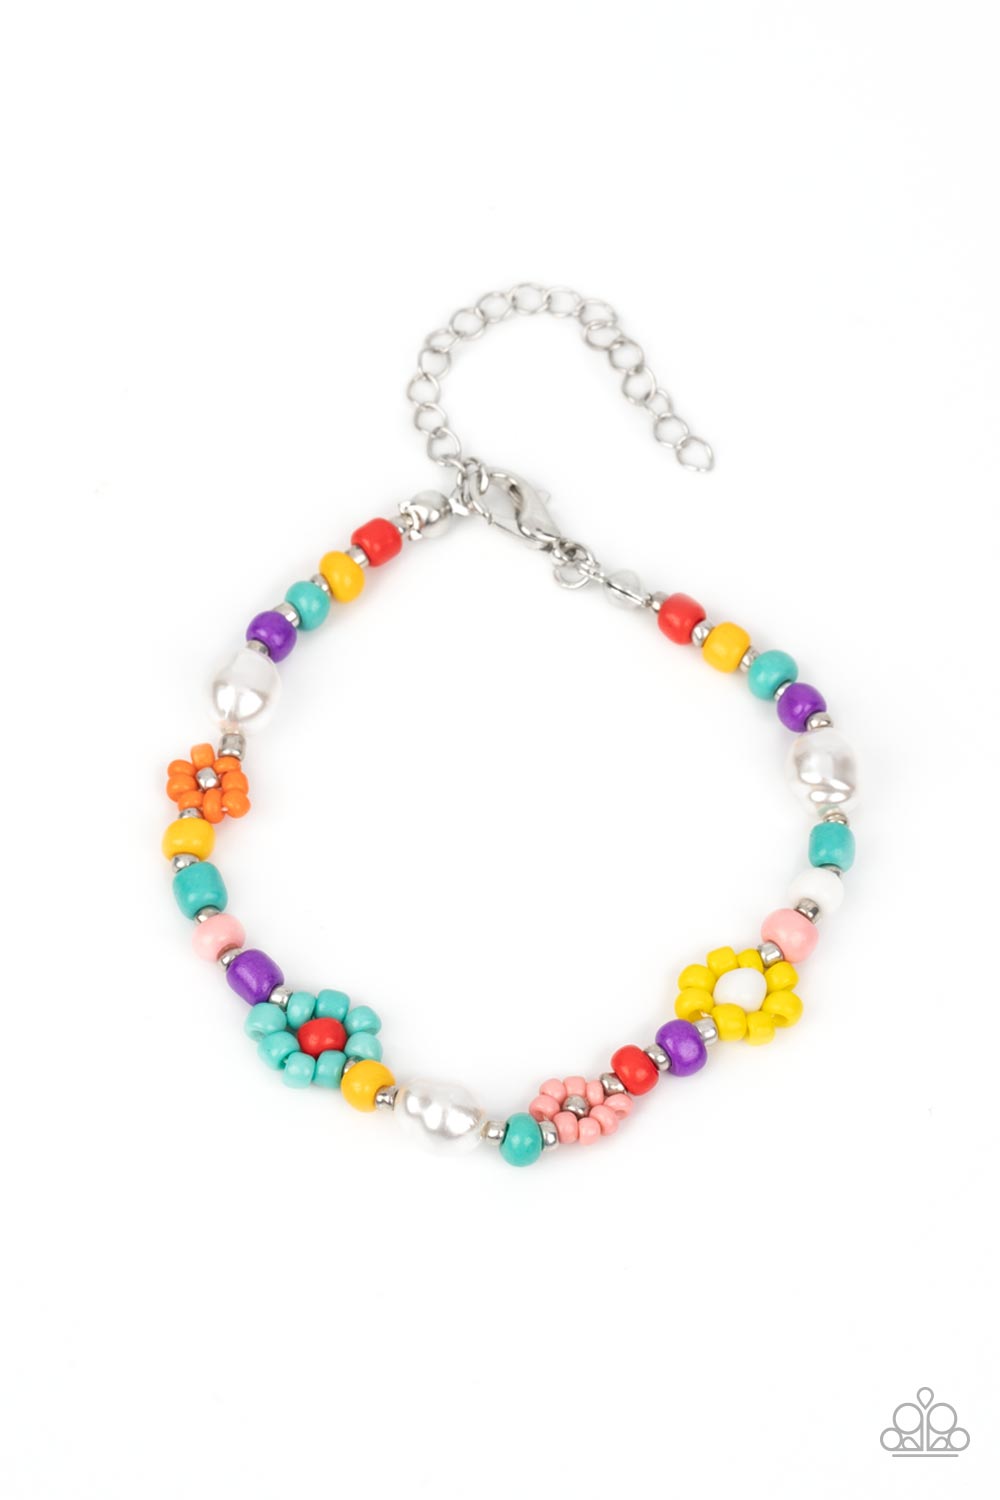 Modeled after gerber daisies, multicolored seed beed petals in shades of Tiffany, orange, pink, and yellow bloom around white, red, and silver beaded centers resulting in a dazzling collection of florals around the wrist. Varying sizes of beads in the same shades, along with a couple of small baroque pearls, separate the floral designs in a far-out finish. Features an adjustable clasp closure.  Sold as one individual bracelet.